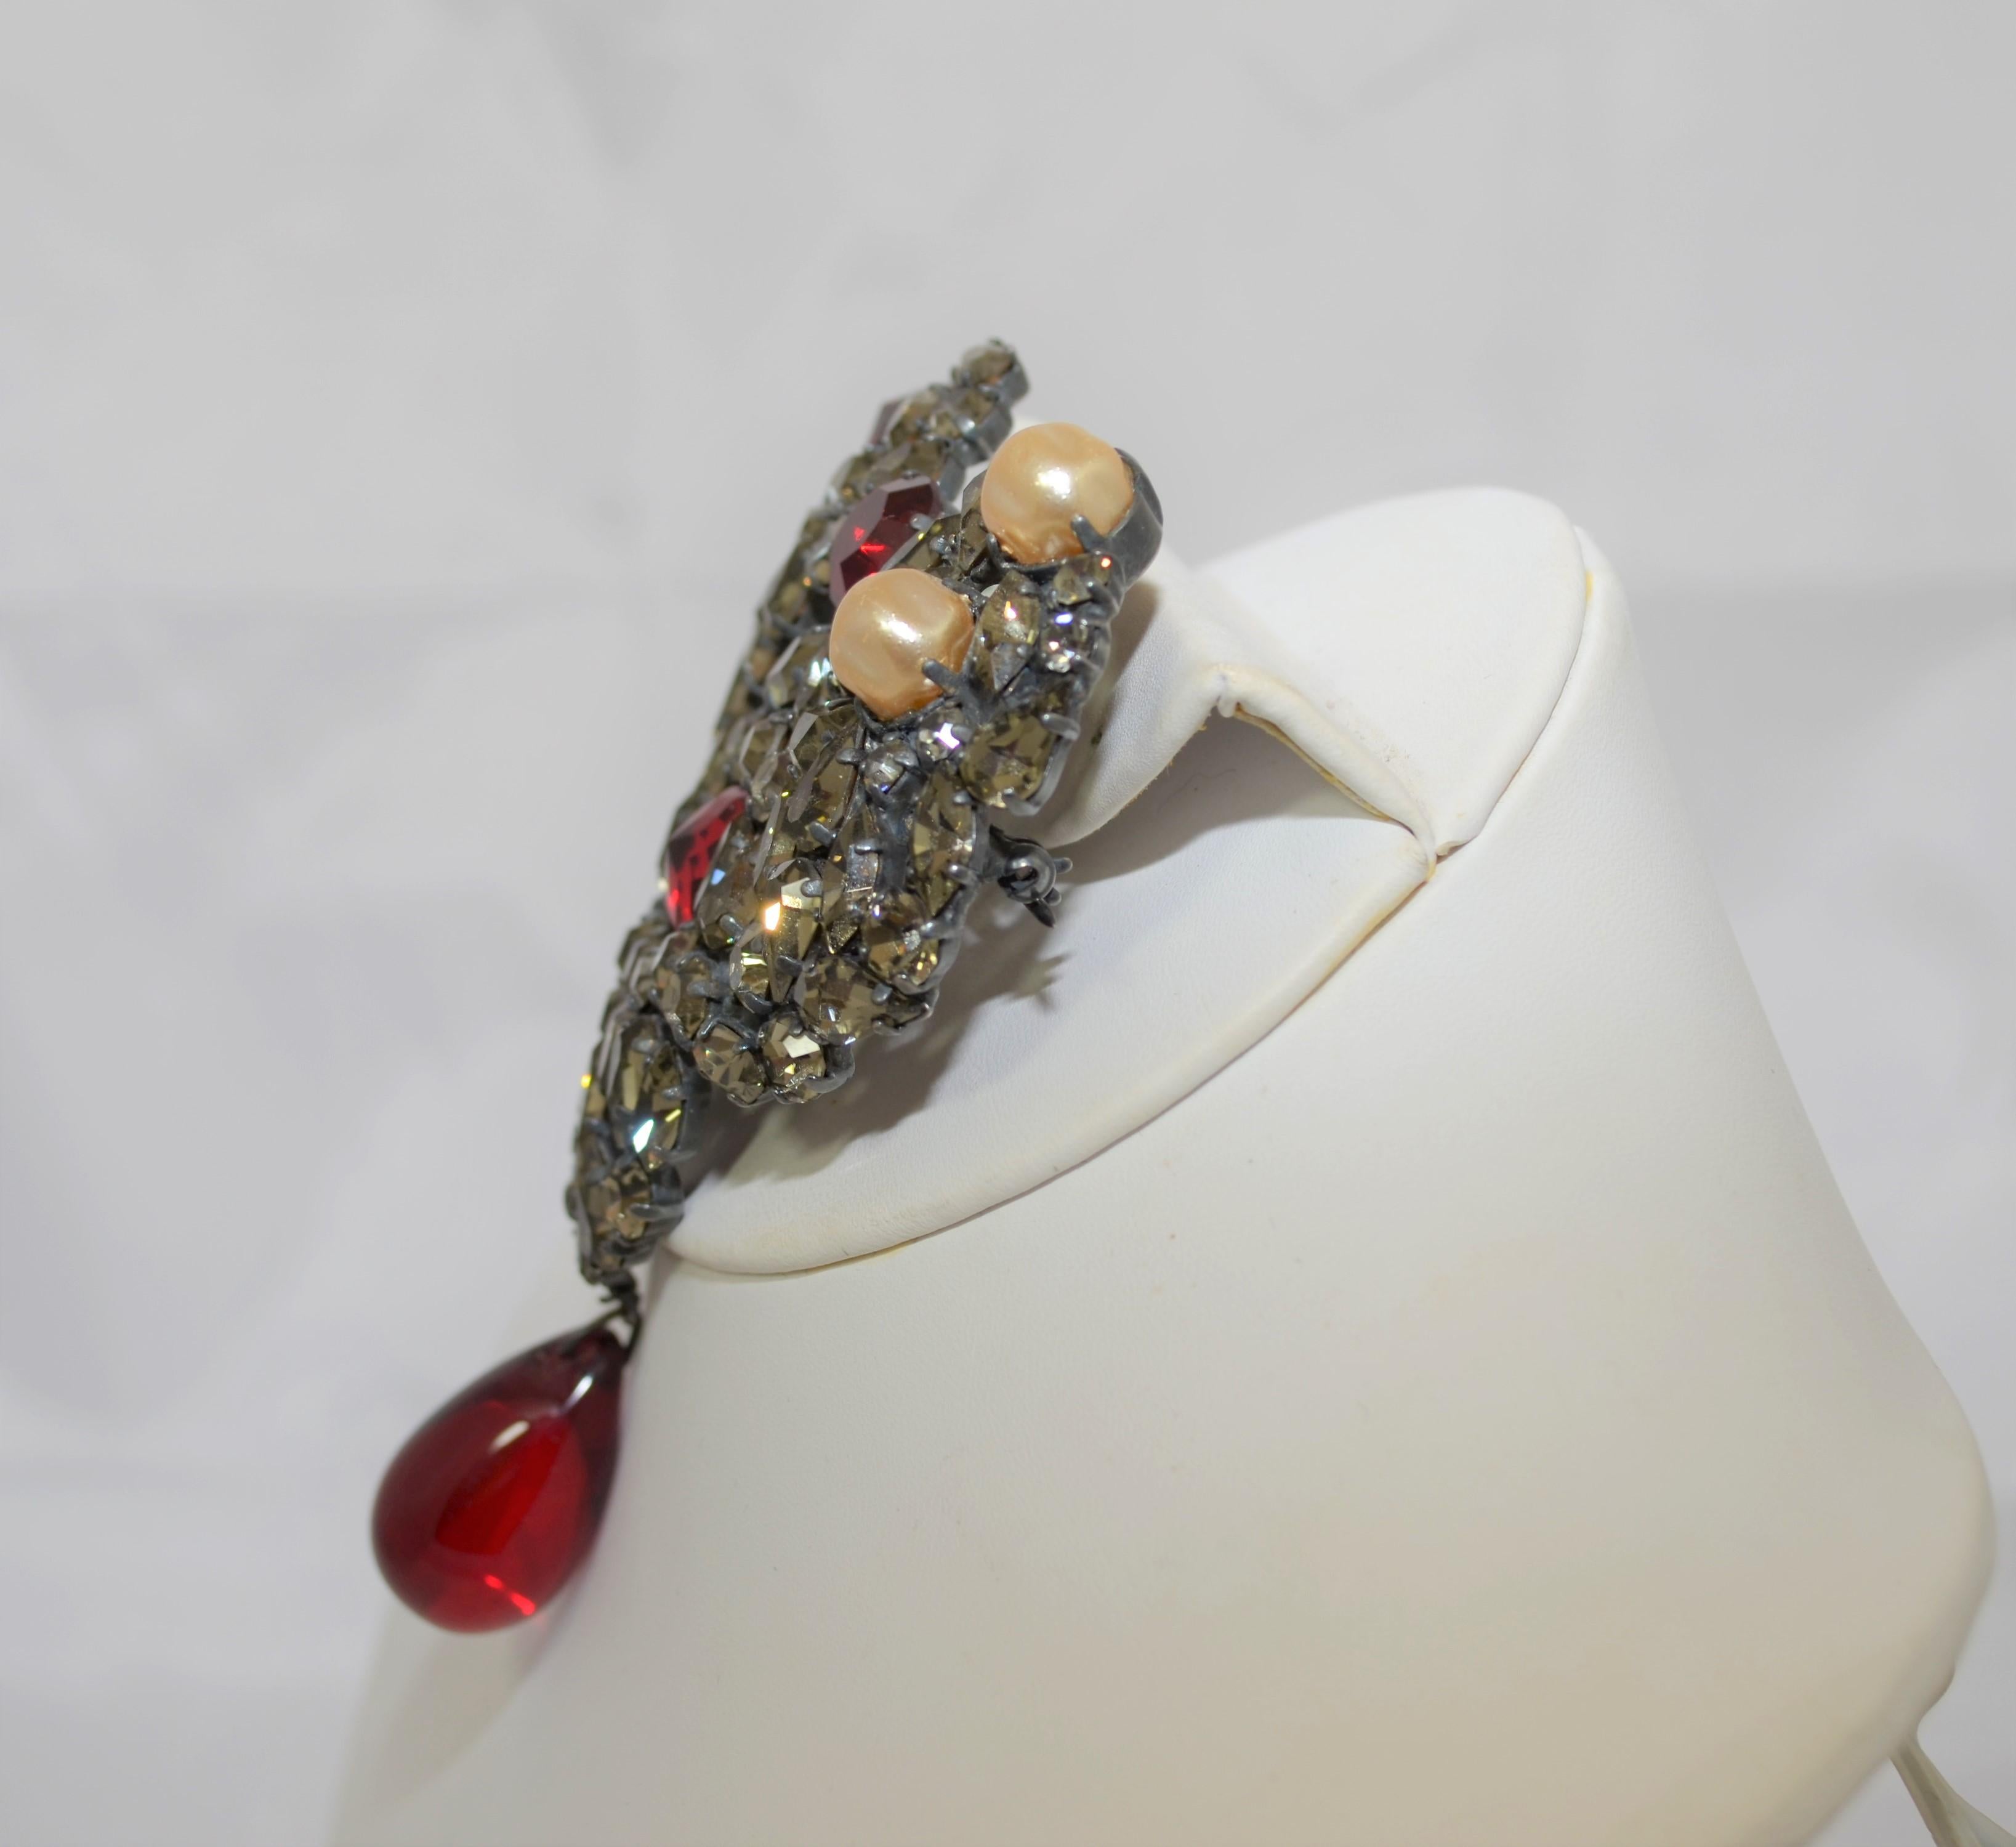 Vintage 1980's YSL Rive Gauche Heart Brooch/Pendant with Pearls 2